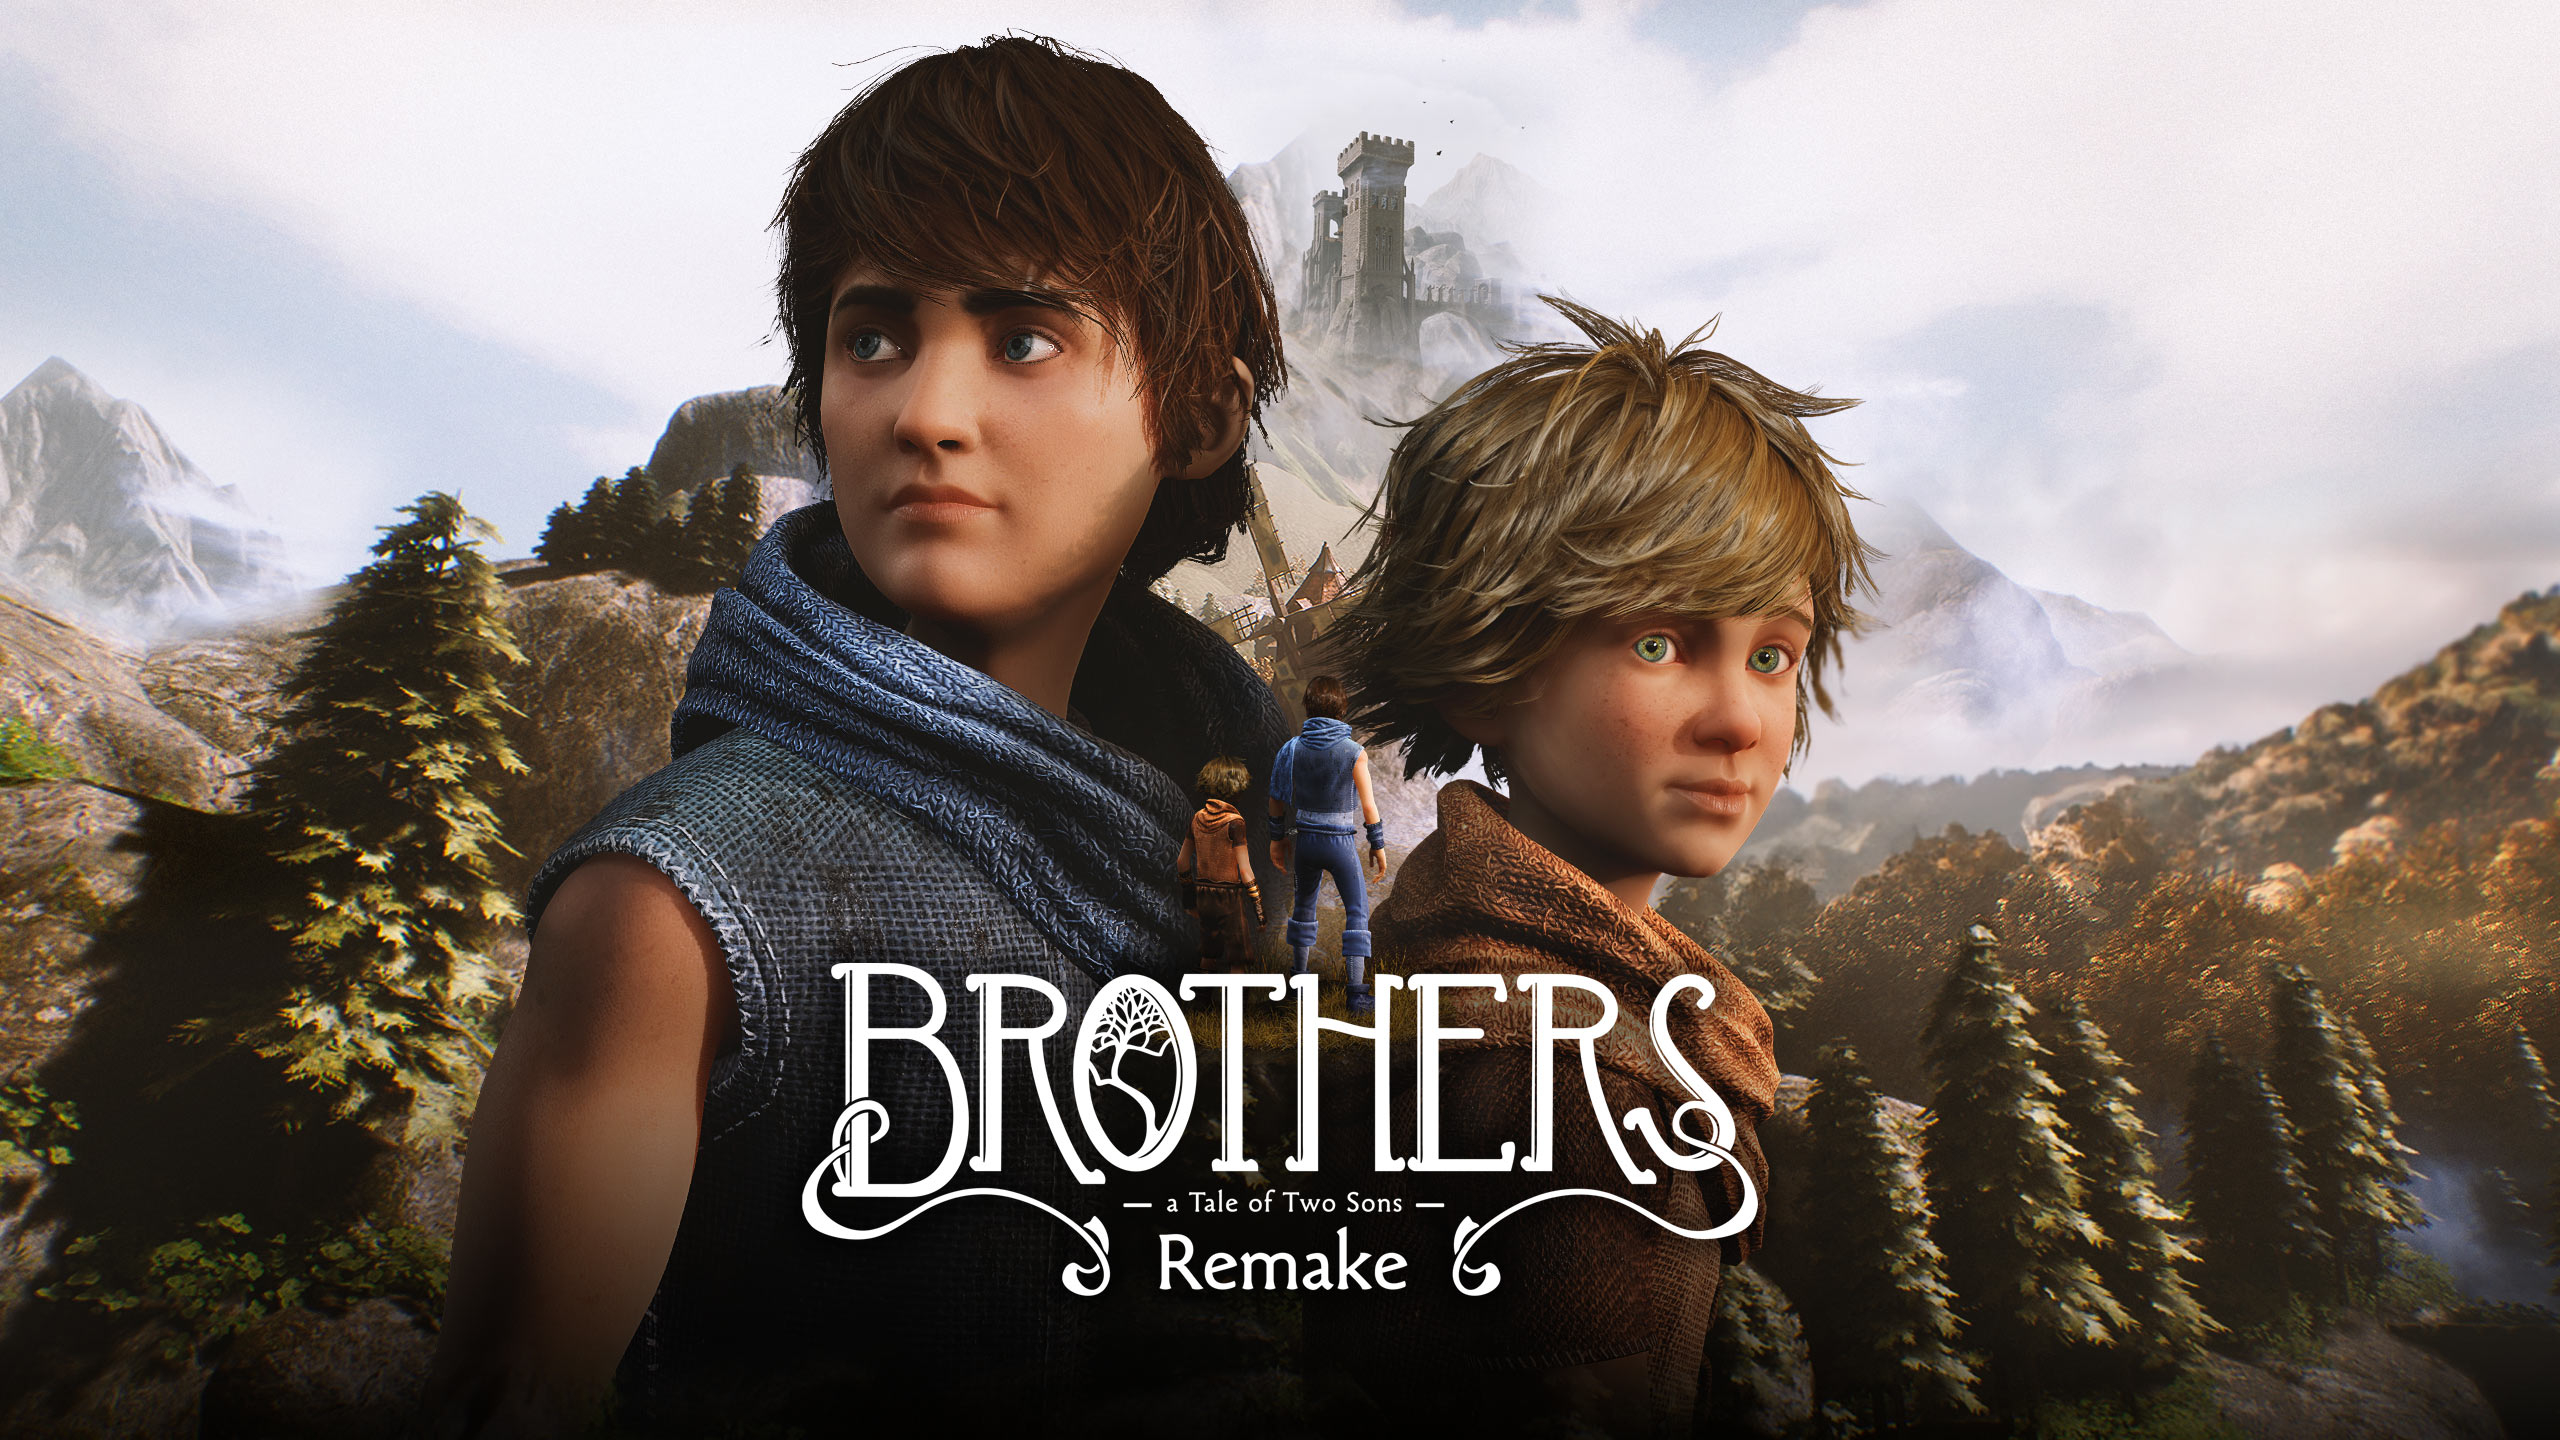 2932x2932 Resolution Brothers A Tale of Two Sons Remake Key Art Ipad ...